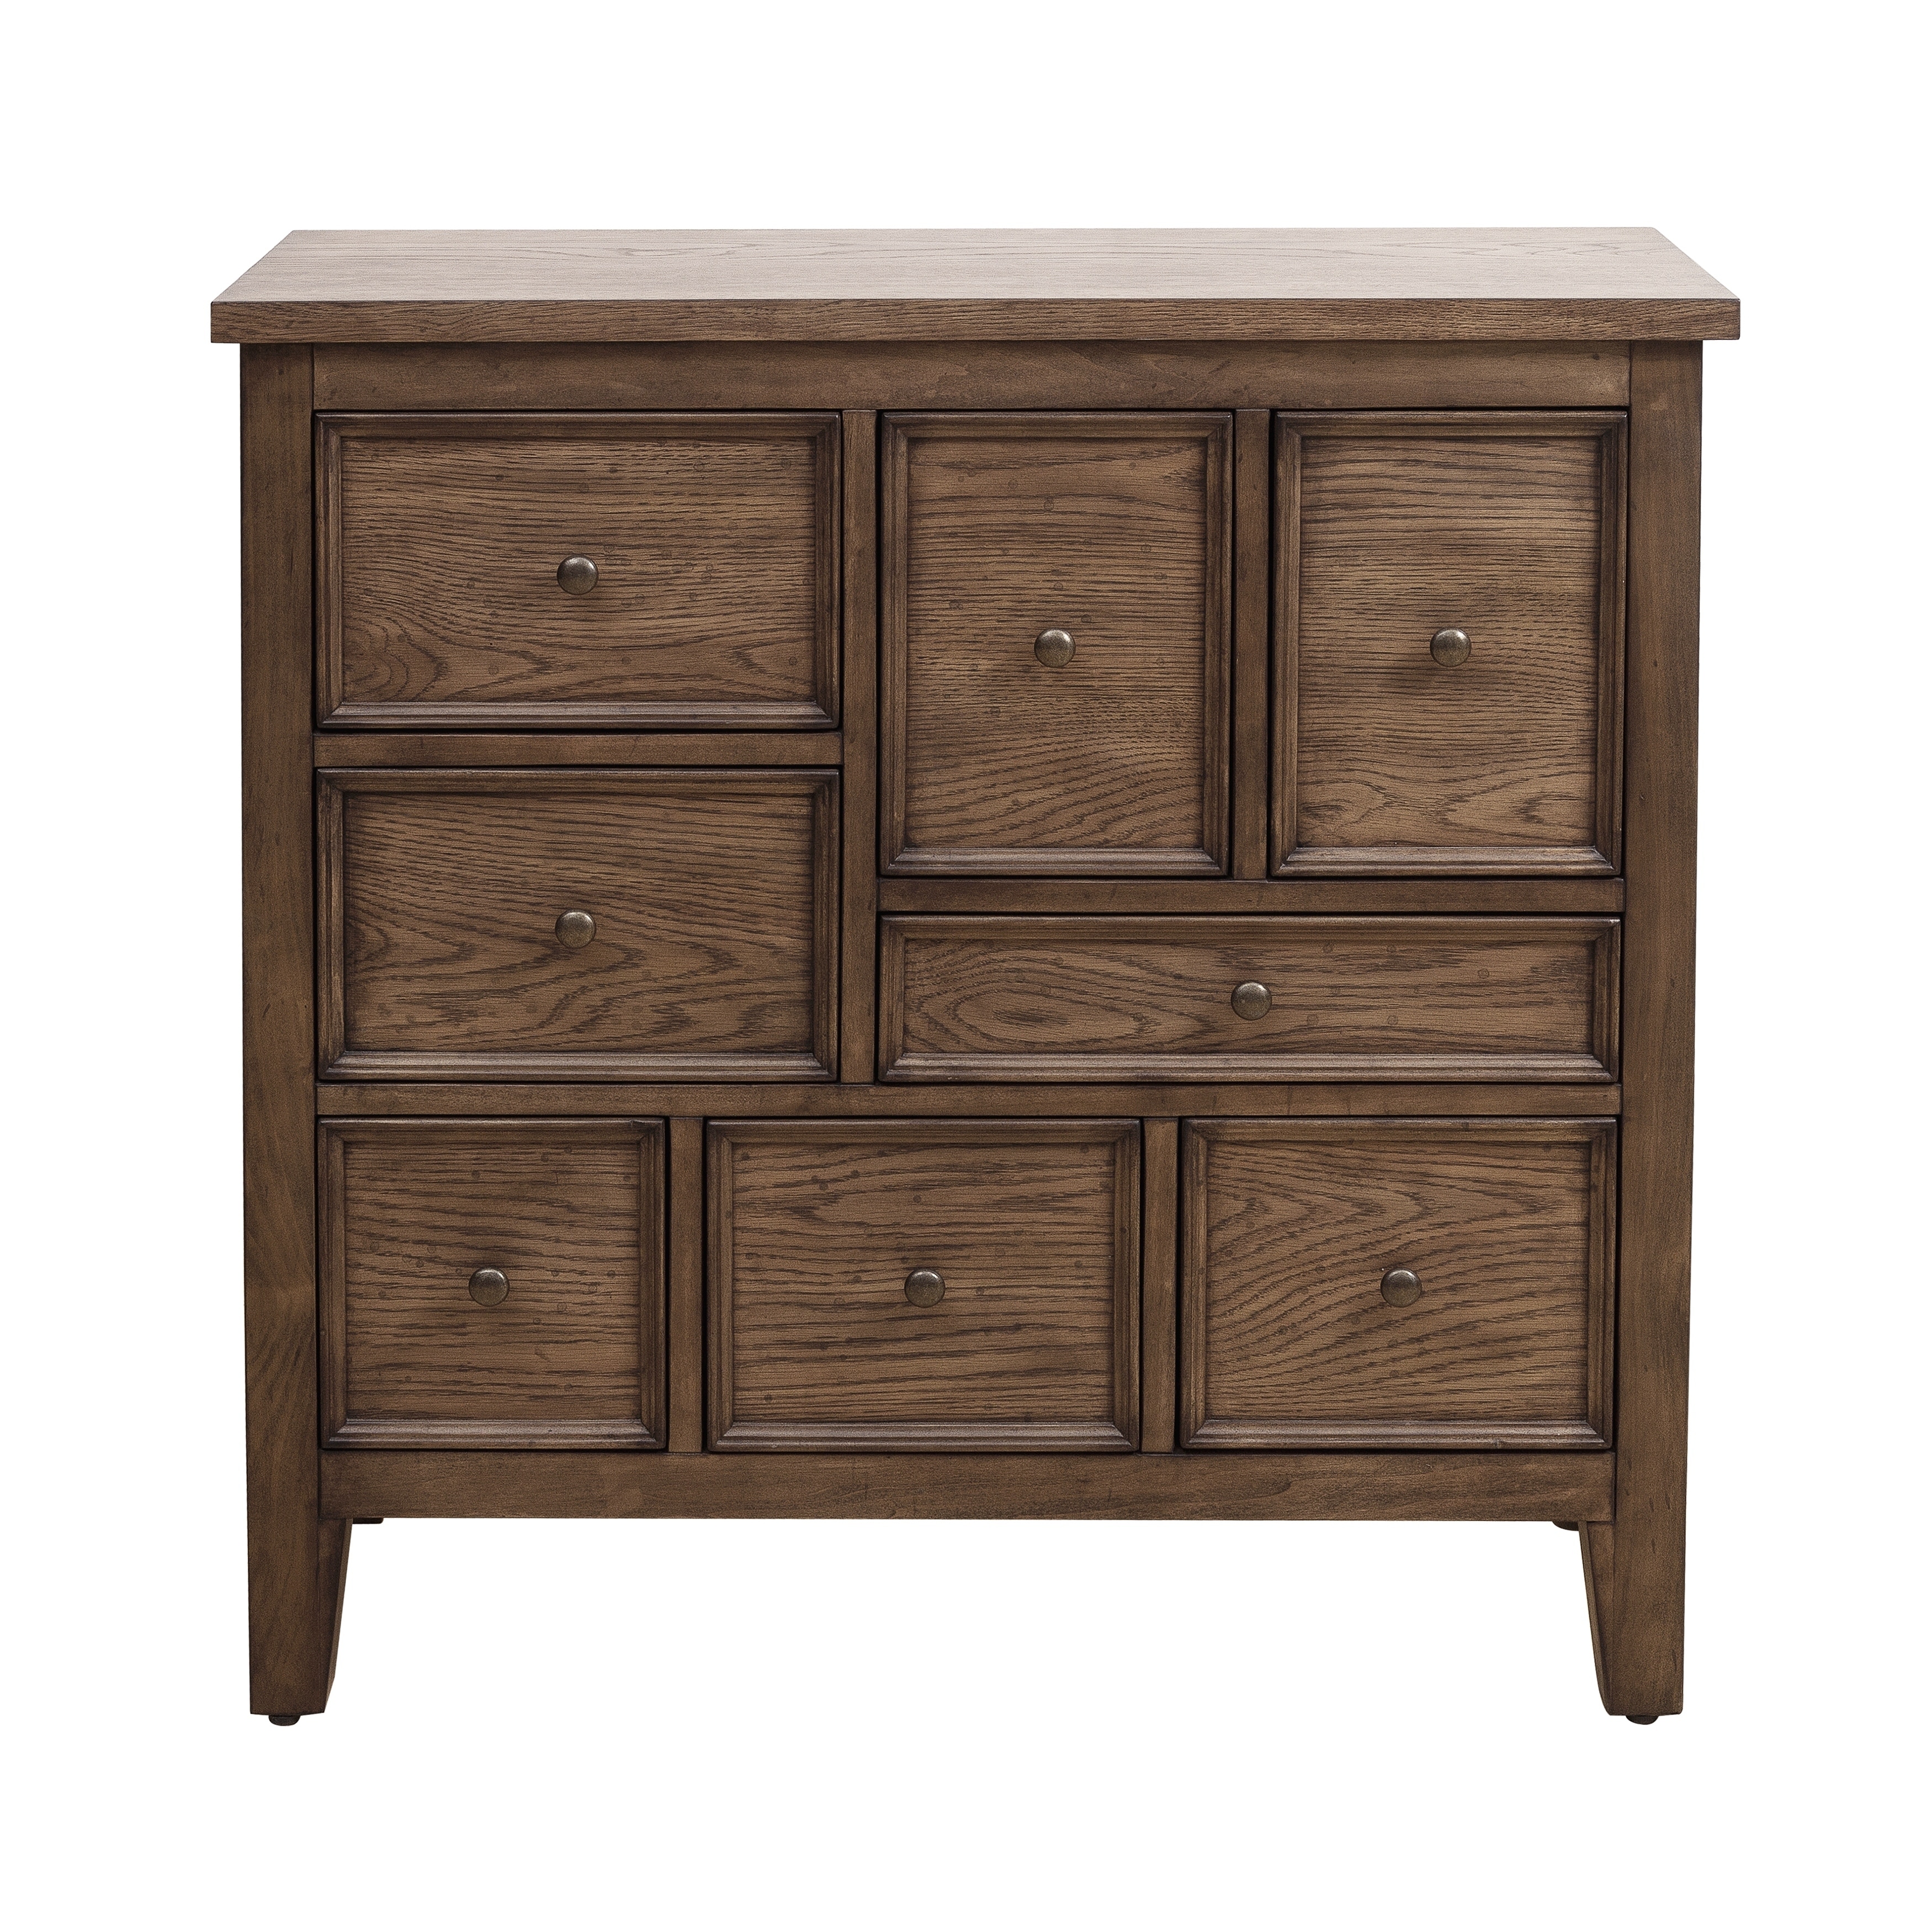 Shop Eclectic Apothecary Style 8 Drawer Hall Chest Overstock